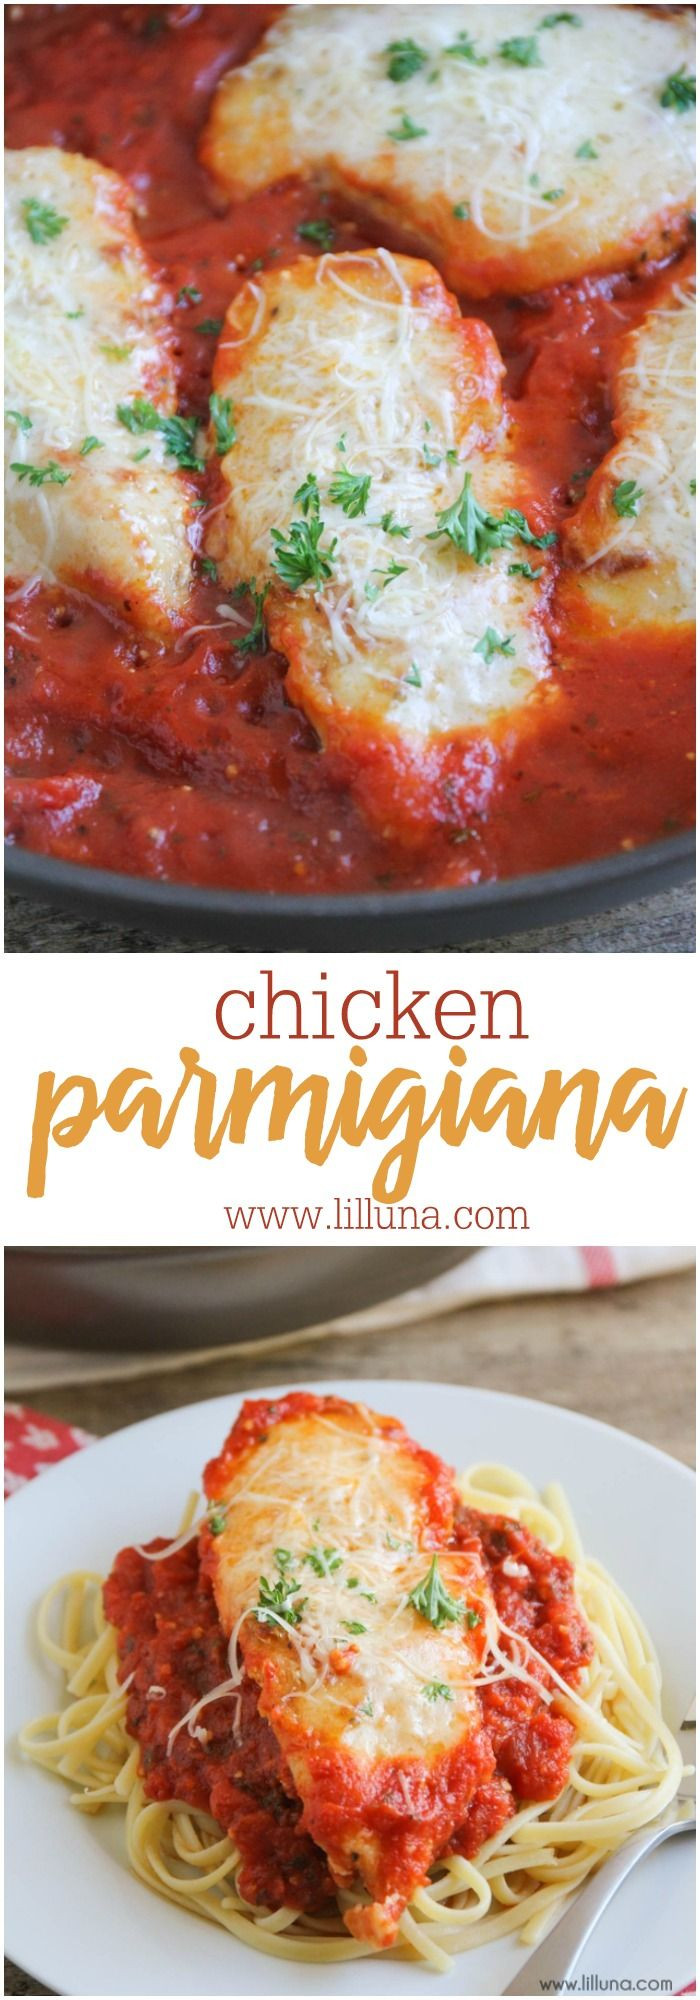 Italian Recipes With Chicken
 DELICIOUS Chicken Parmigiana one of our favorite Italian